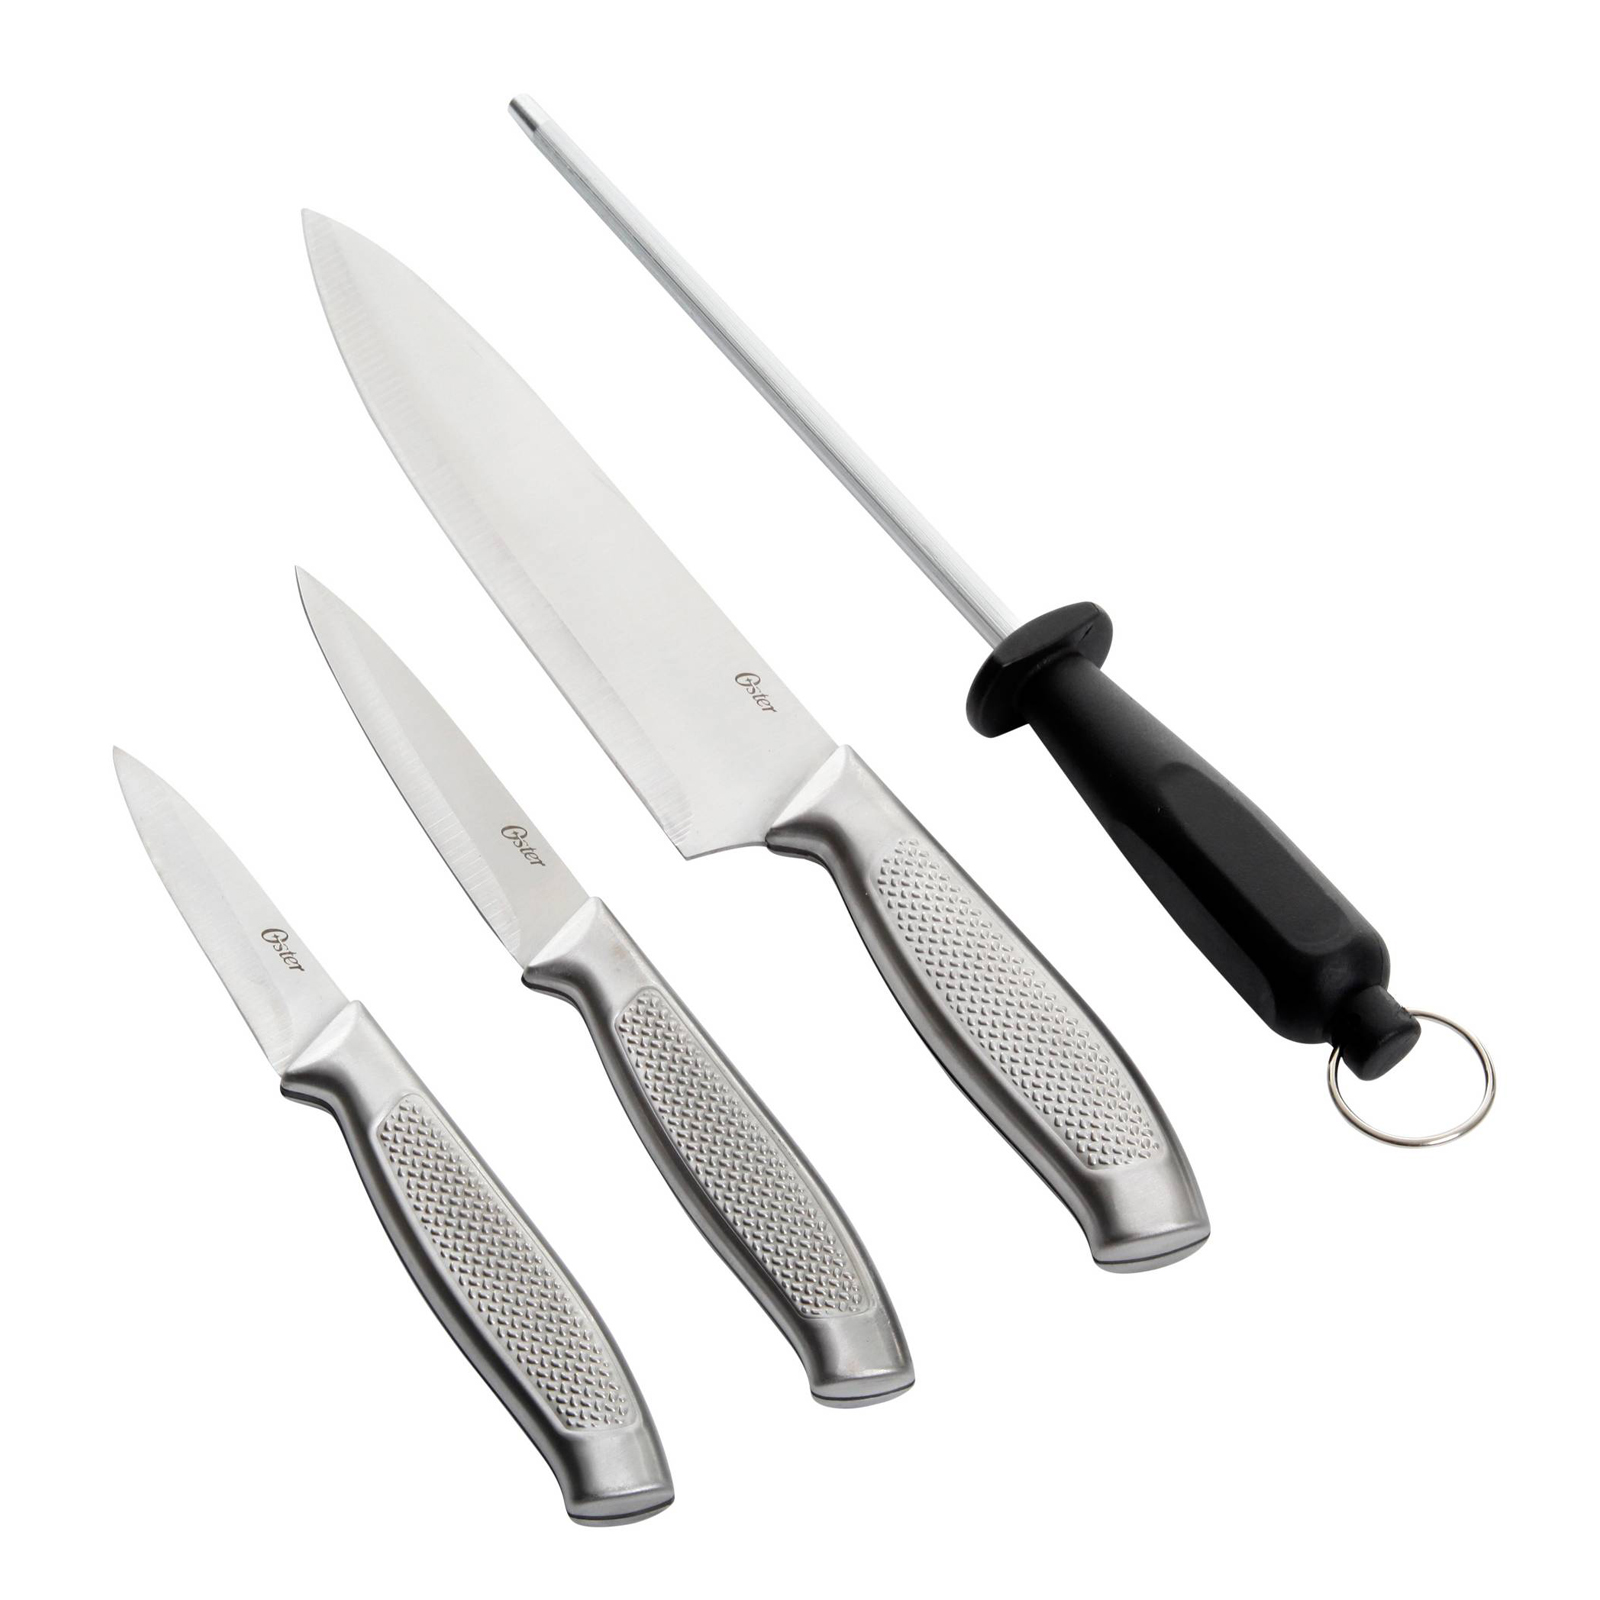 Oster Edgefield 4 pc Cutlery Set - Stainless Steel Handle - 1.8/1.5 mm - Clam Pack